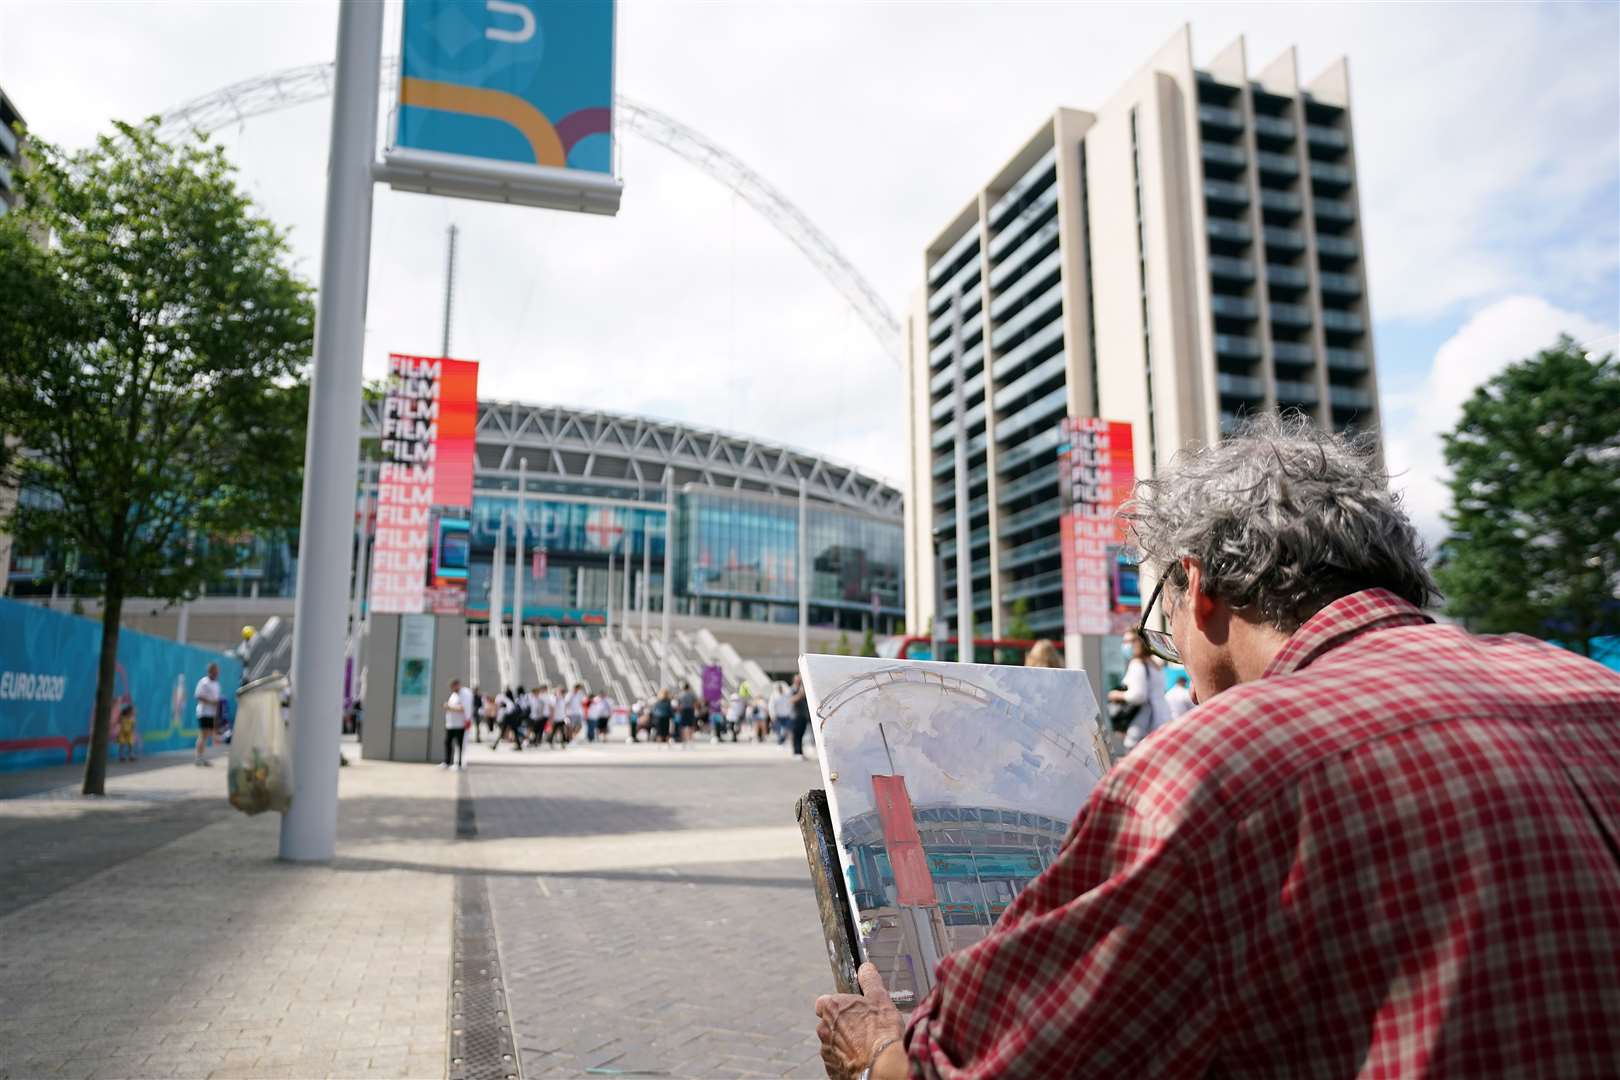 An artist paints a picture of the ground ahead of the Euro 2020 final at Wembley Stadium (Zac Goodwin/PA)